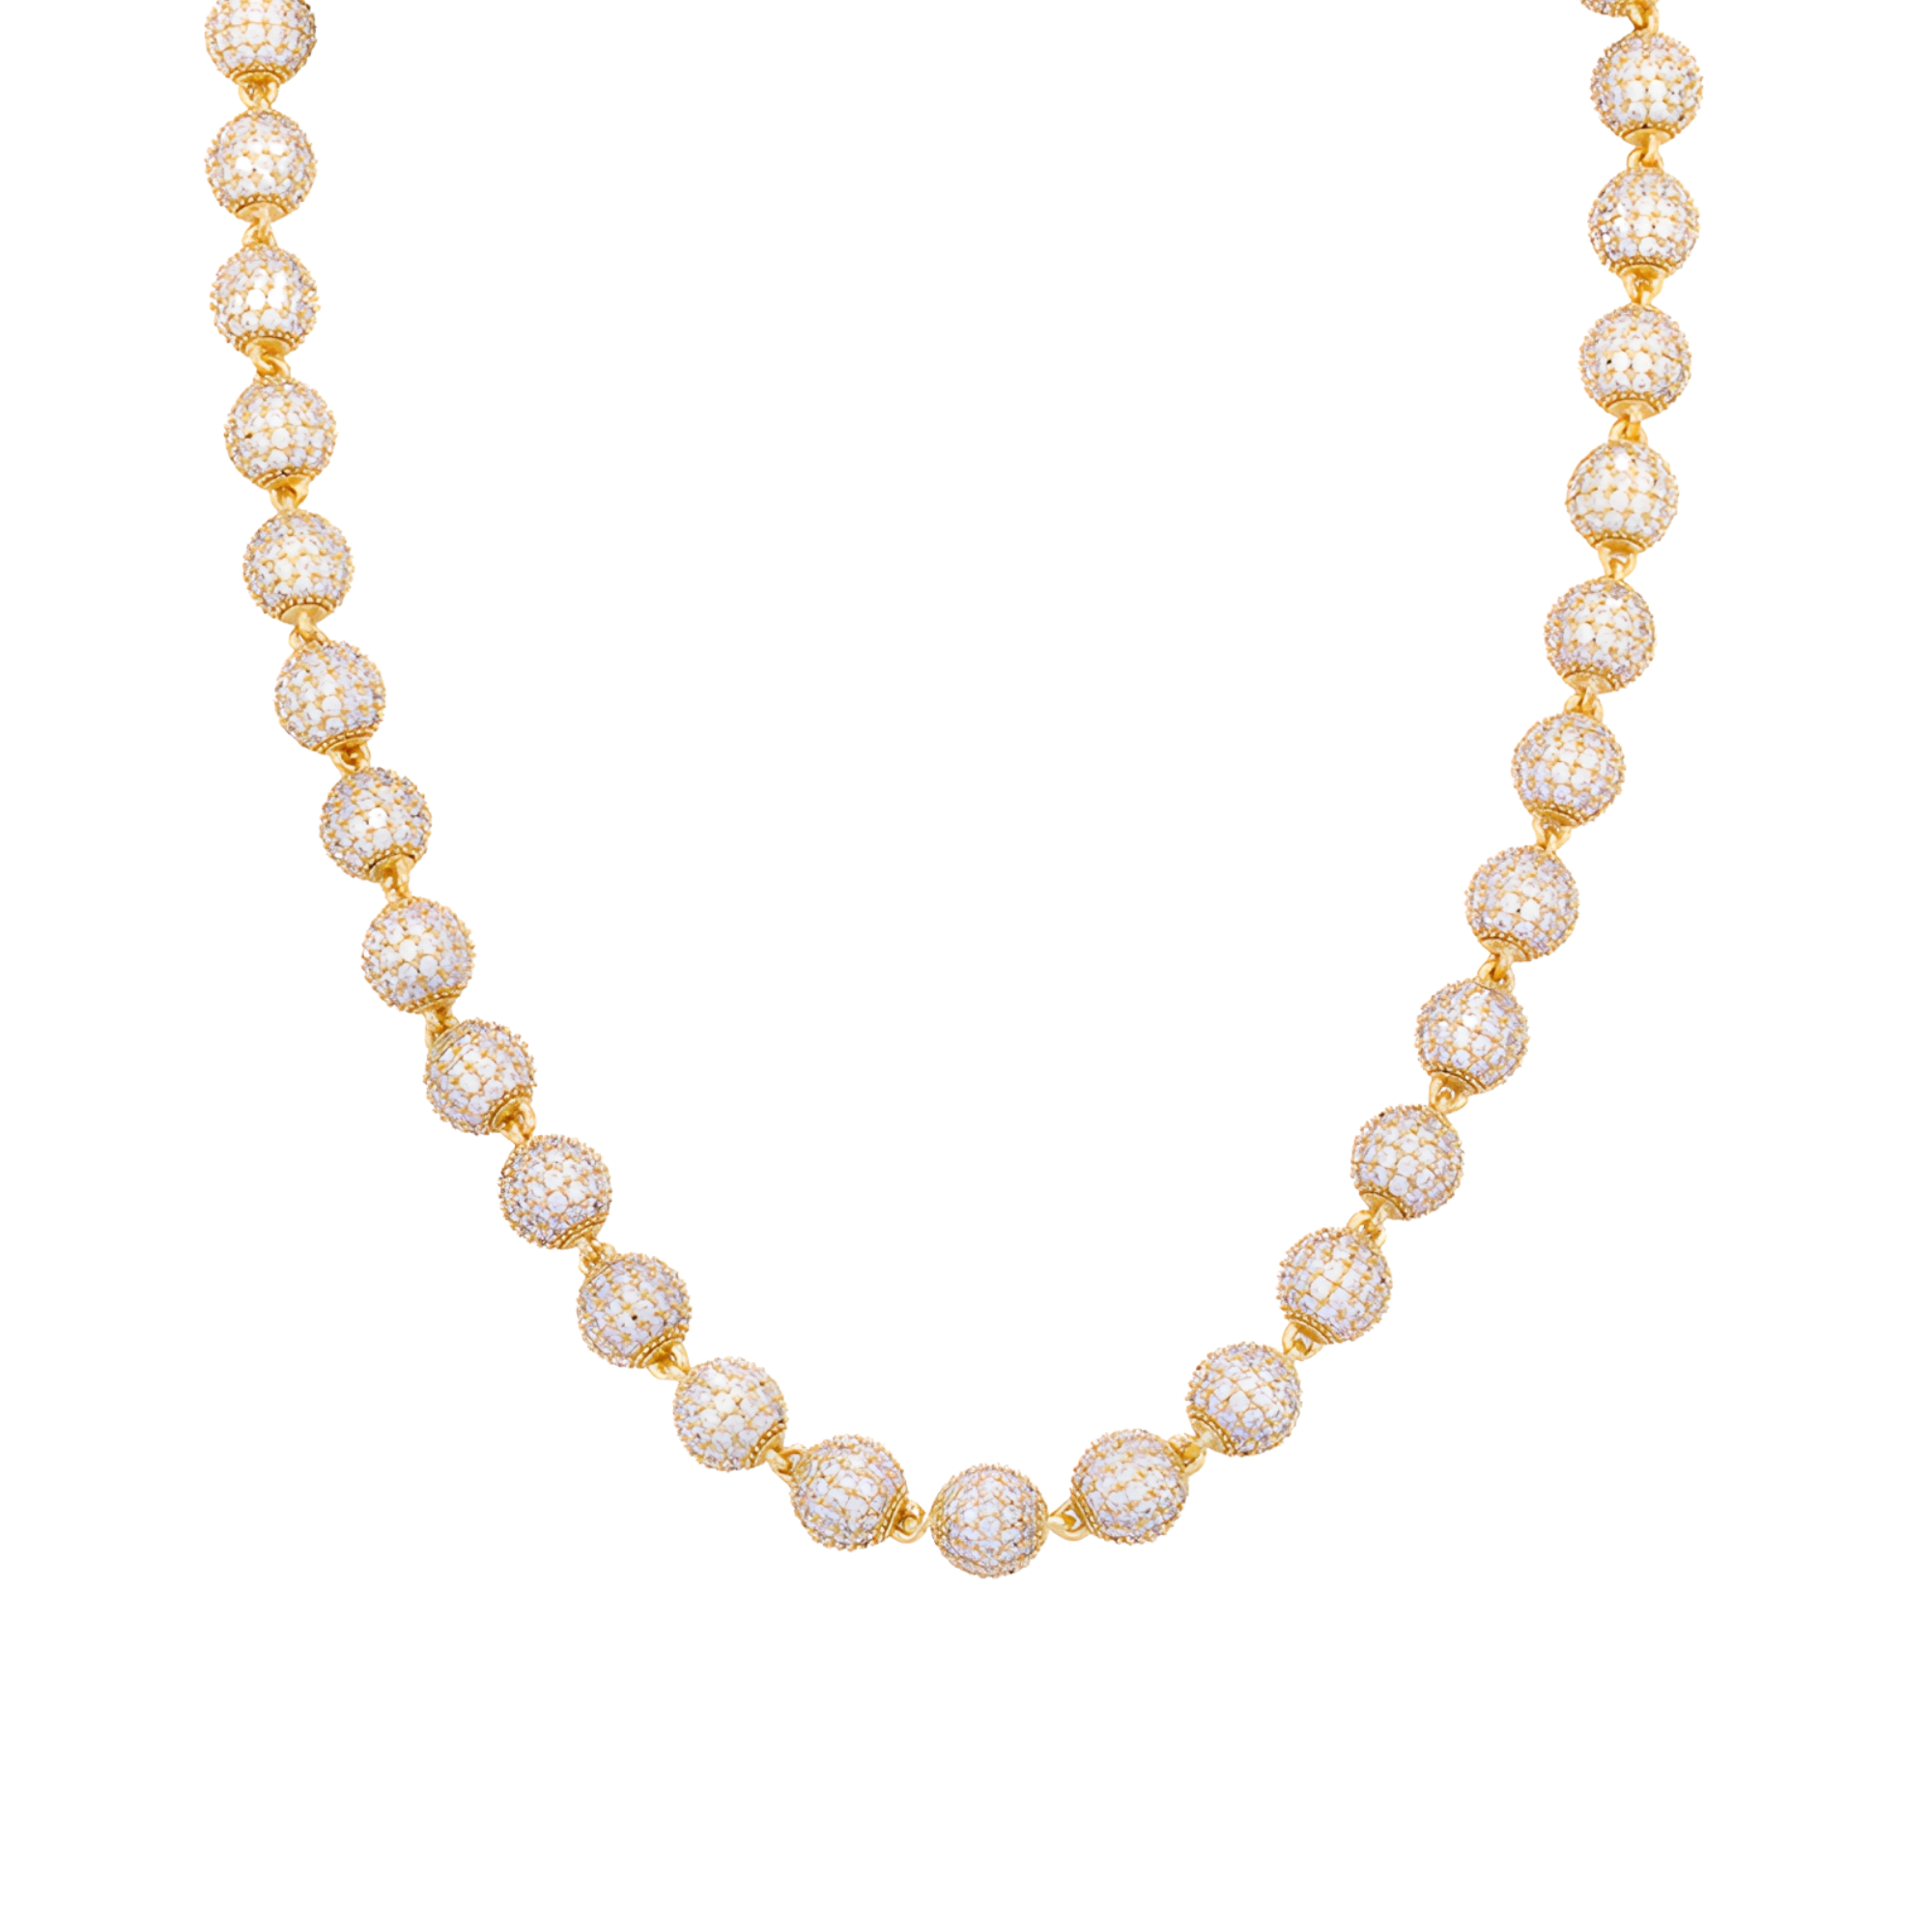 Hillenic 18K Gold Iced Bead Chain 